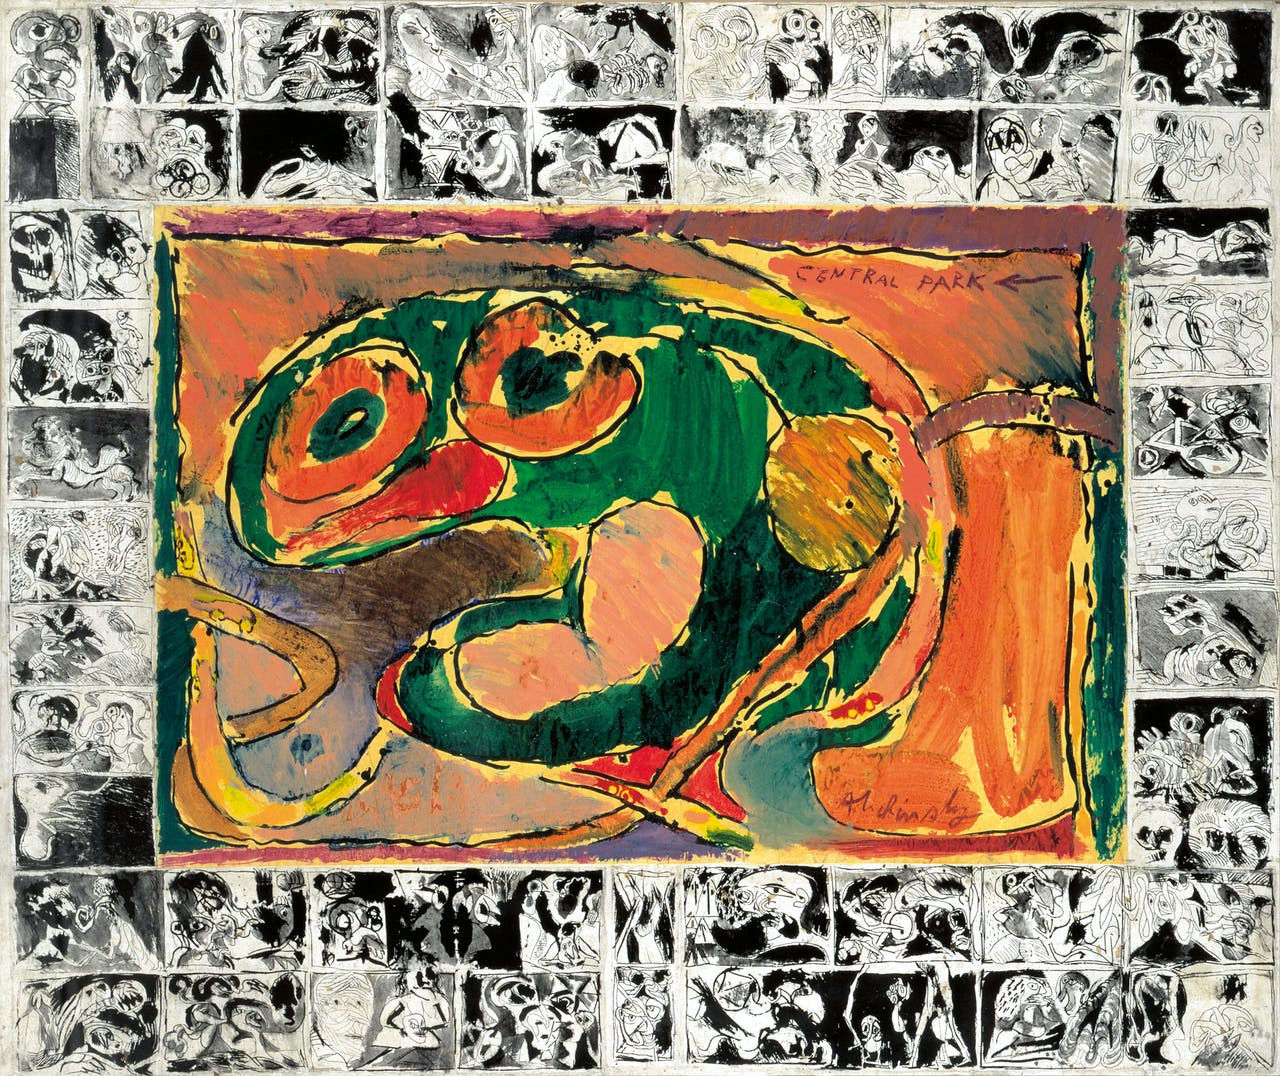 Cobra art; Central Park, from 1965, is a key work in Alechinsky's oeuvre. For the first time he worked with acrylic paint on paper and with his typical 'frame'.